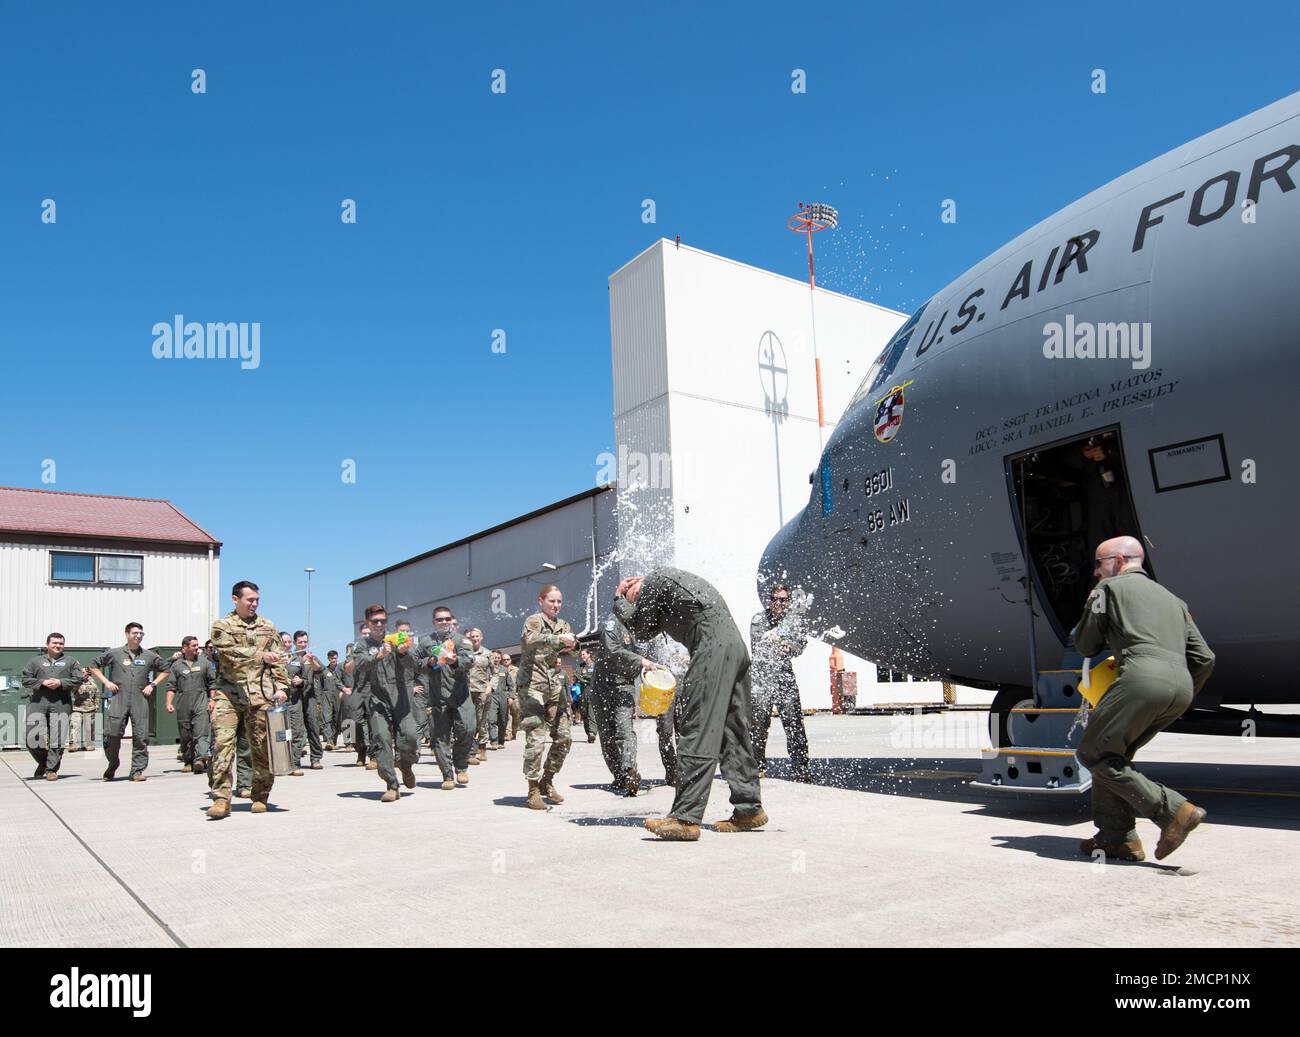 U.S. Air Force Brig. Gen. Joshua M. Olson, 86th Airlift Wing commander, is greeted by members of Team Ramstein at Ramstein Air Base, Germany, July 8, 2022. A final flight, or fini-flight, is a USAF tradition to celebrate one's last flight with their unit which includes spraying champagne or water on the Airman, making a toast, and dowsing water from a fire truck onto the aircraft and aircrew. Stock Photo